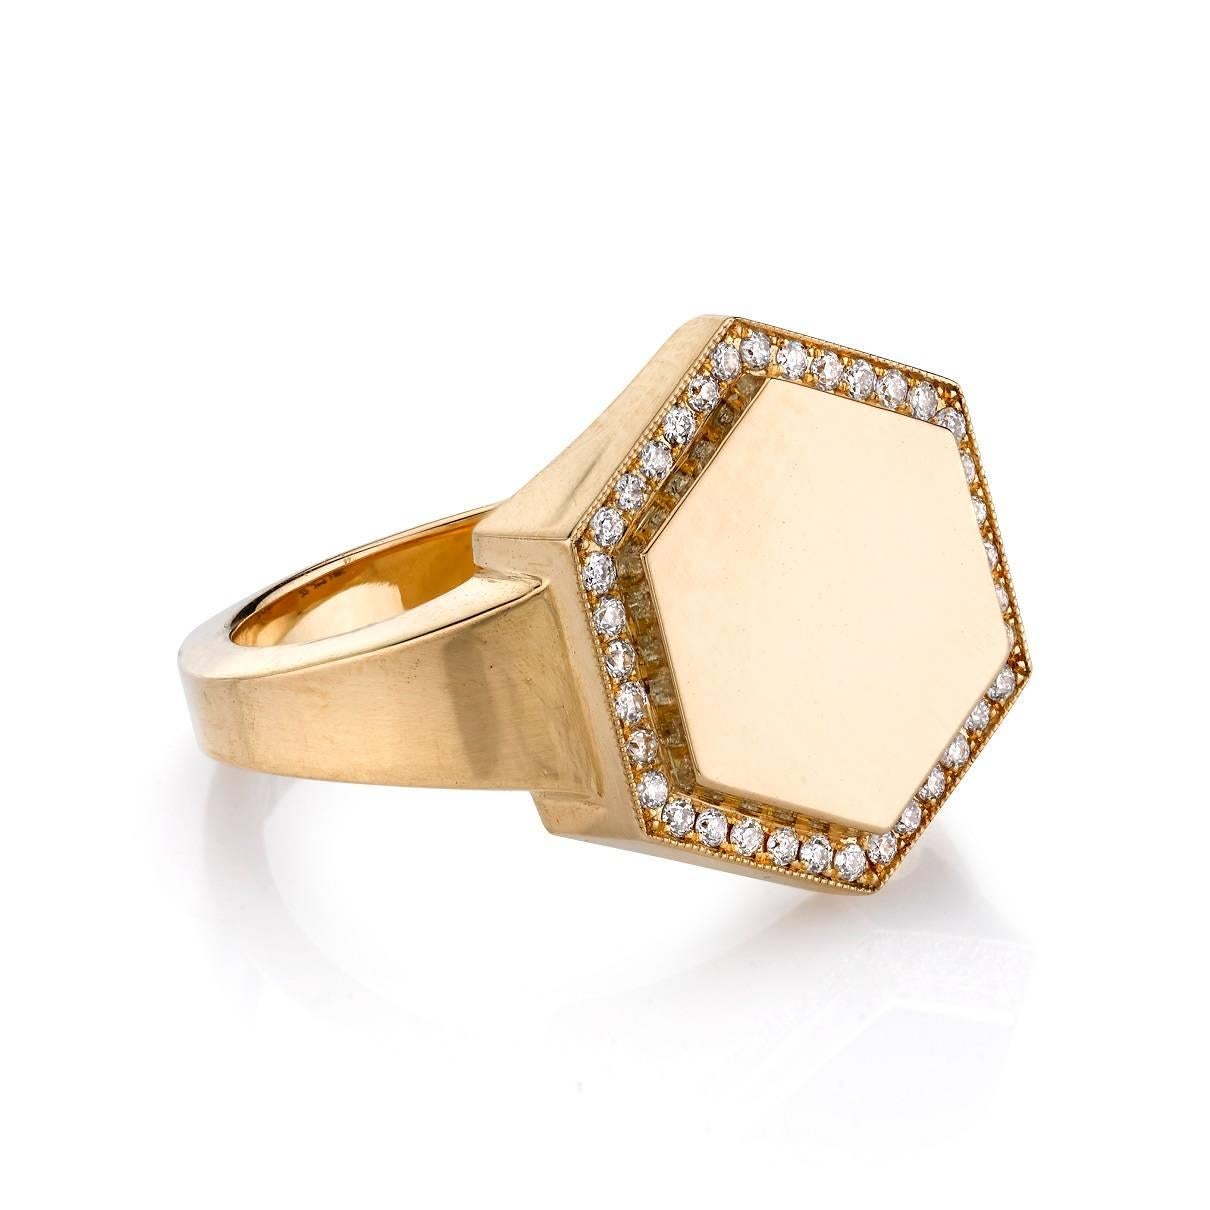 Vintage inspired 18k yellow gold hexagon signet ring with 0.15ctw old European cut diamond pave frame. Ring includes engraving of up to three letters, please inquire to specify.

Ring is currently size 6. Please contact us about potential